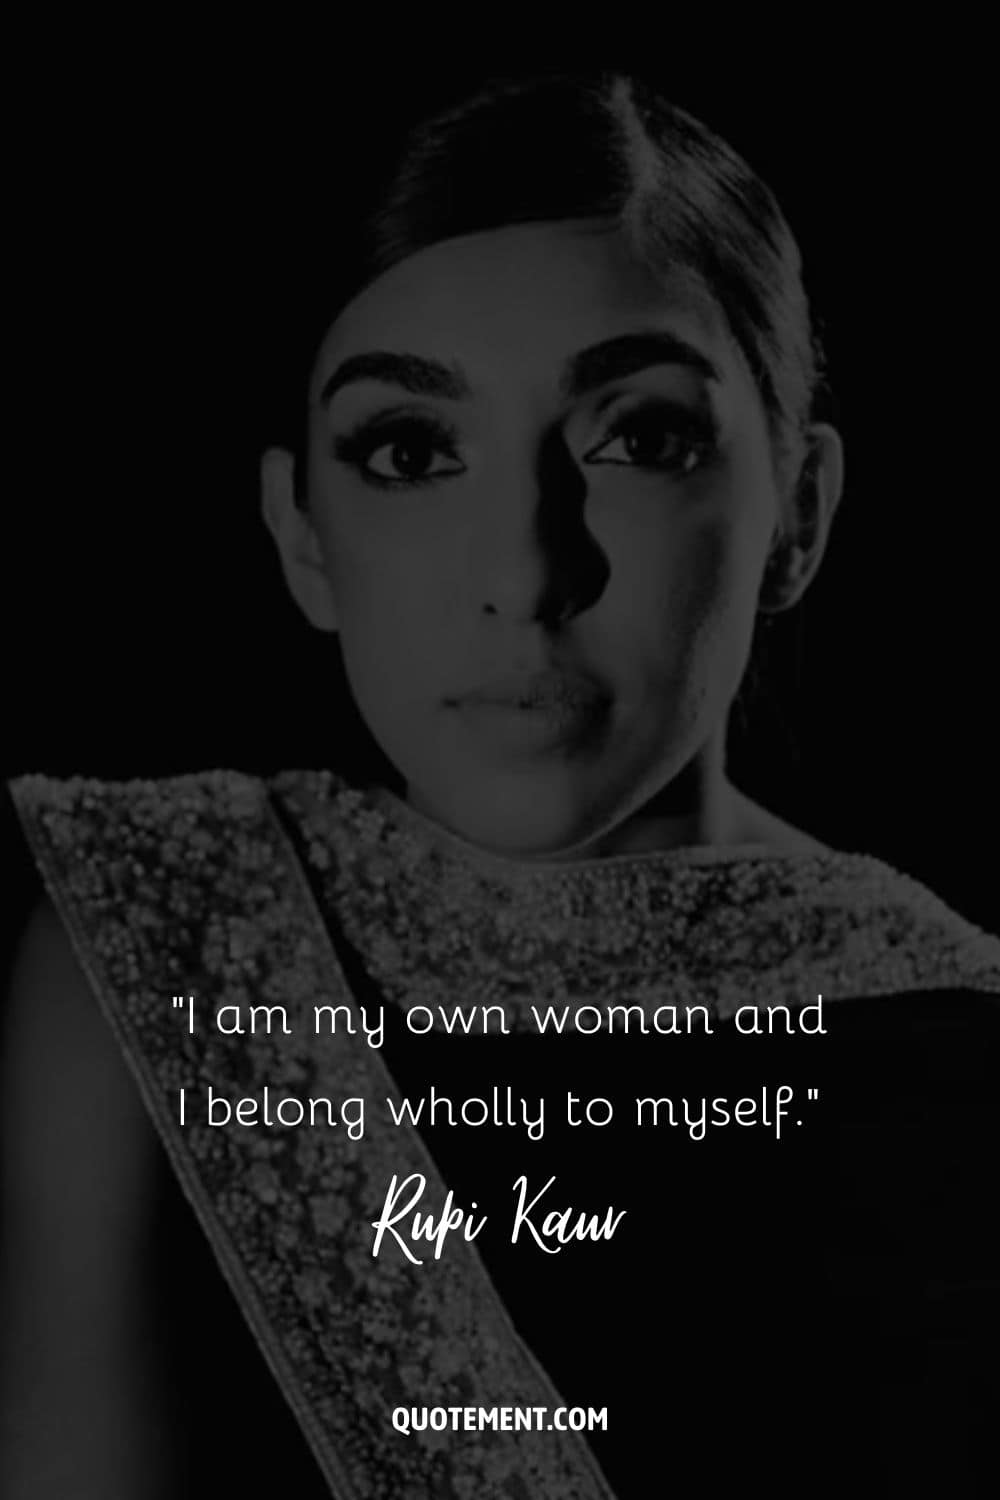 I am my own woman and I belong wholly to myself.